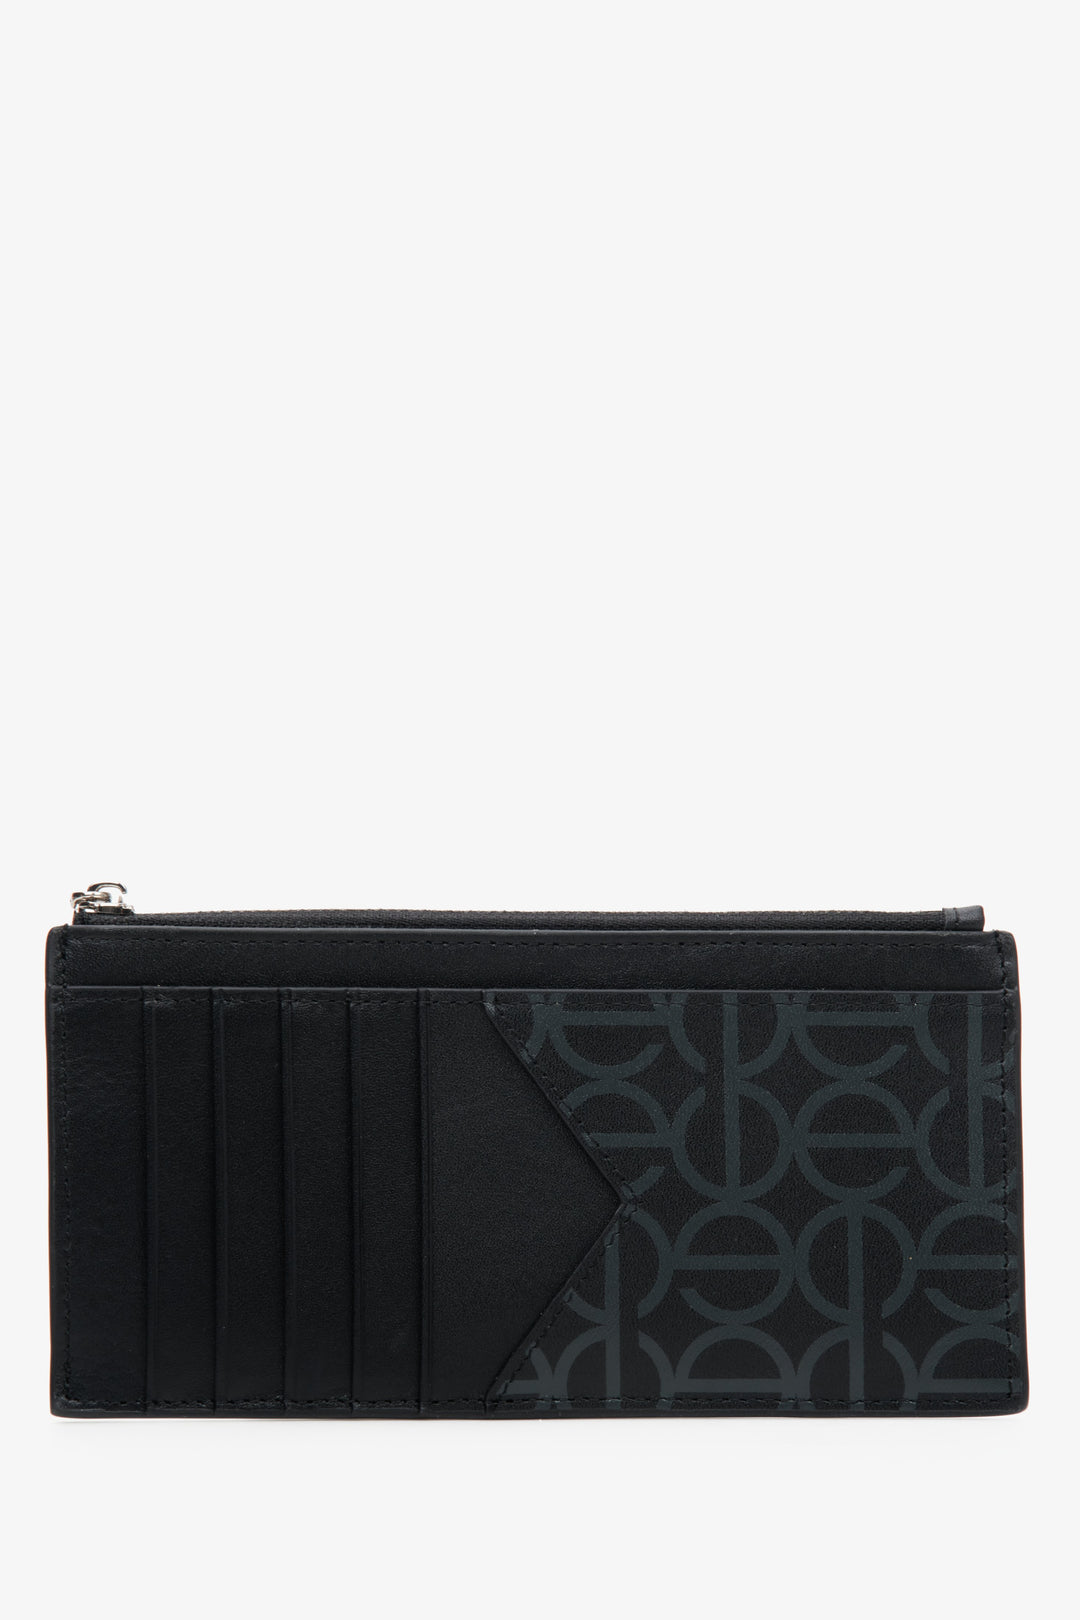 Large black women's wristlet by Estro, made of genuine leather with silver accents - reverse side.